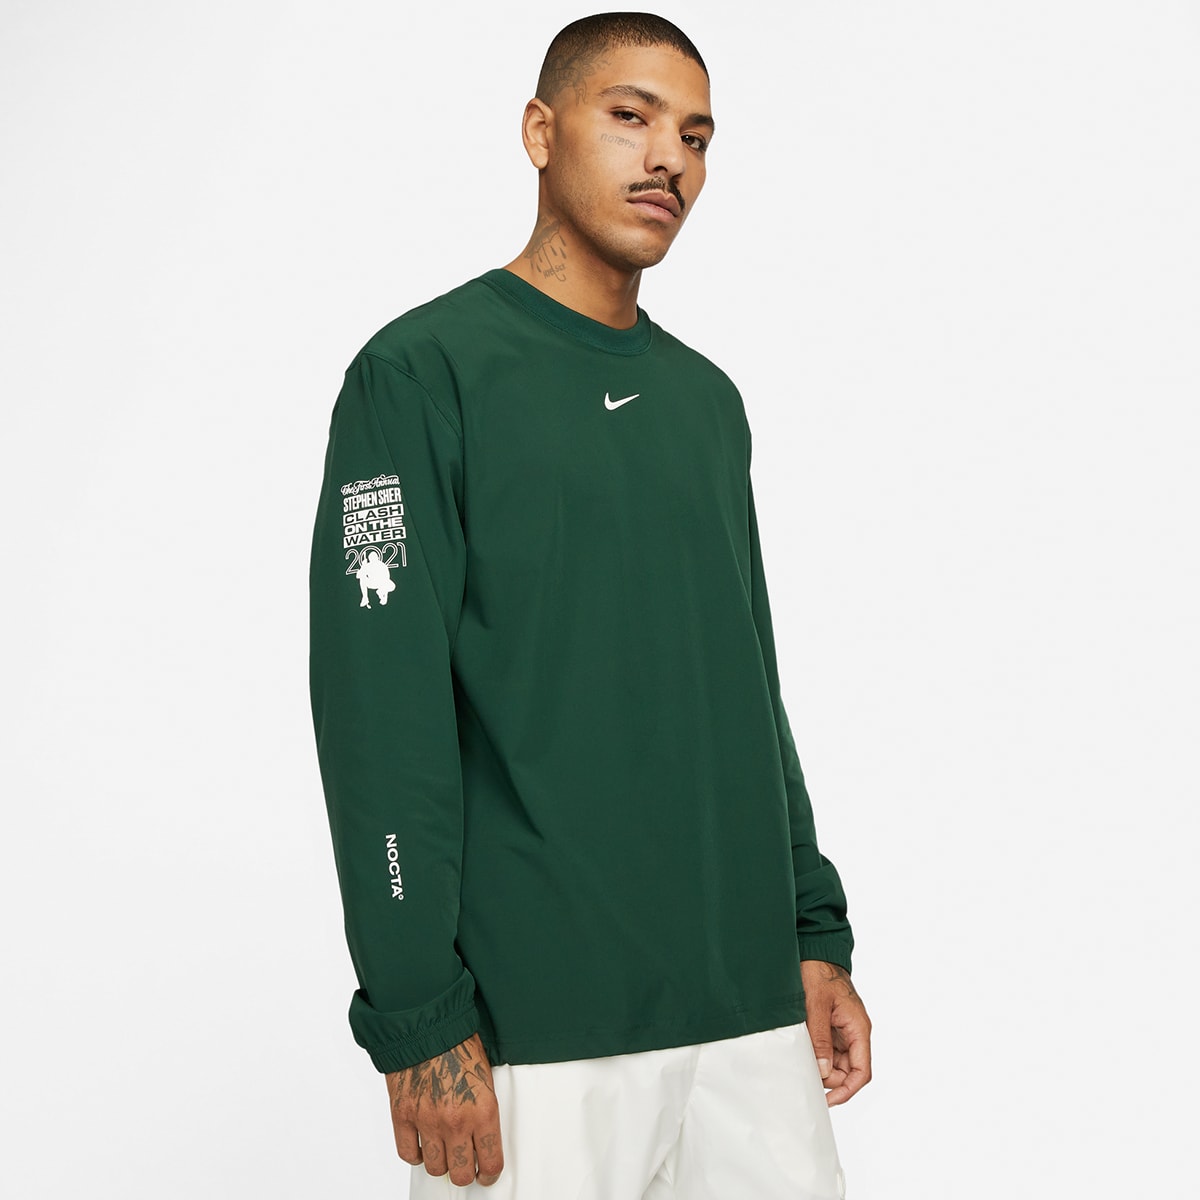 Nike x NOCTA Long Sleeve Woven Crew (Pro Green & Black) | END. Launches